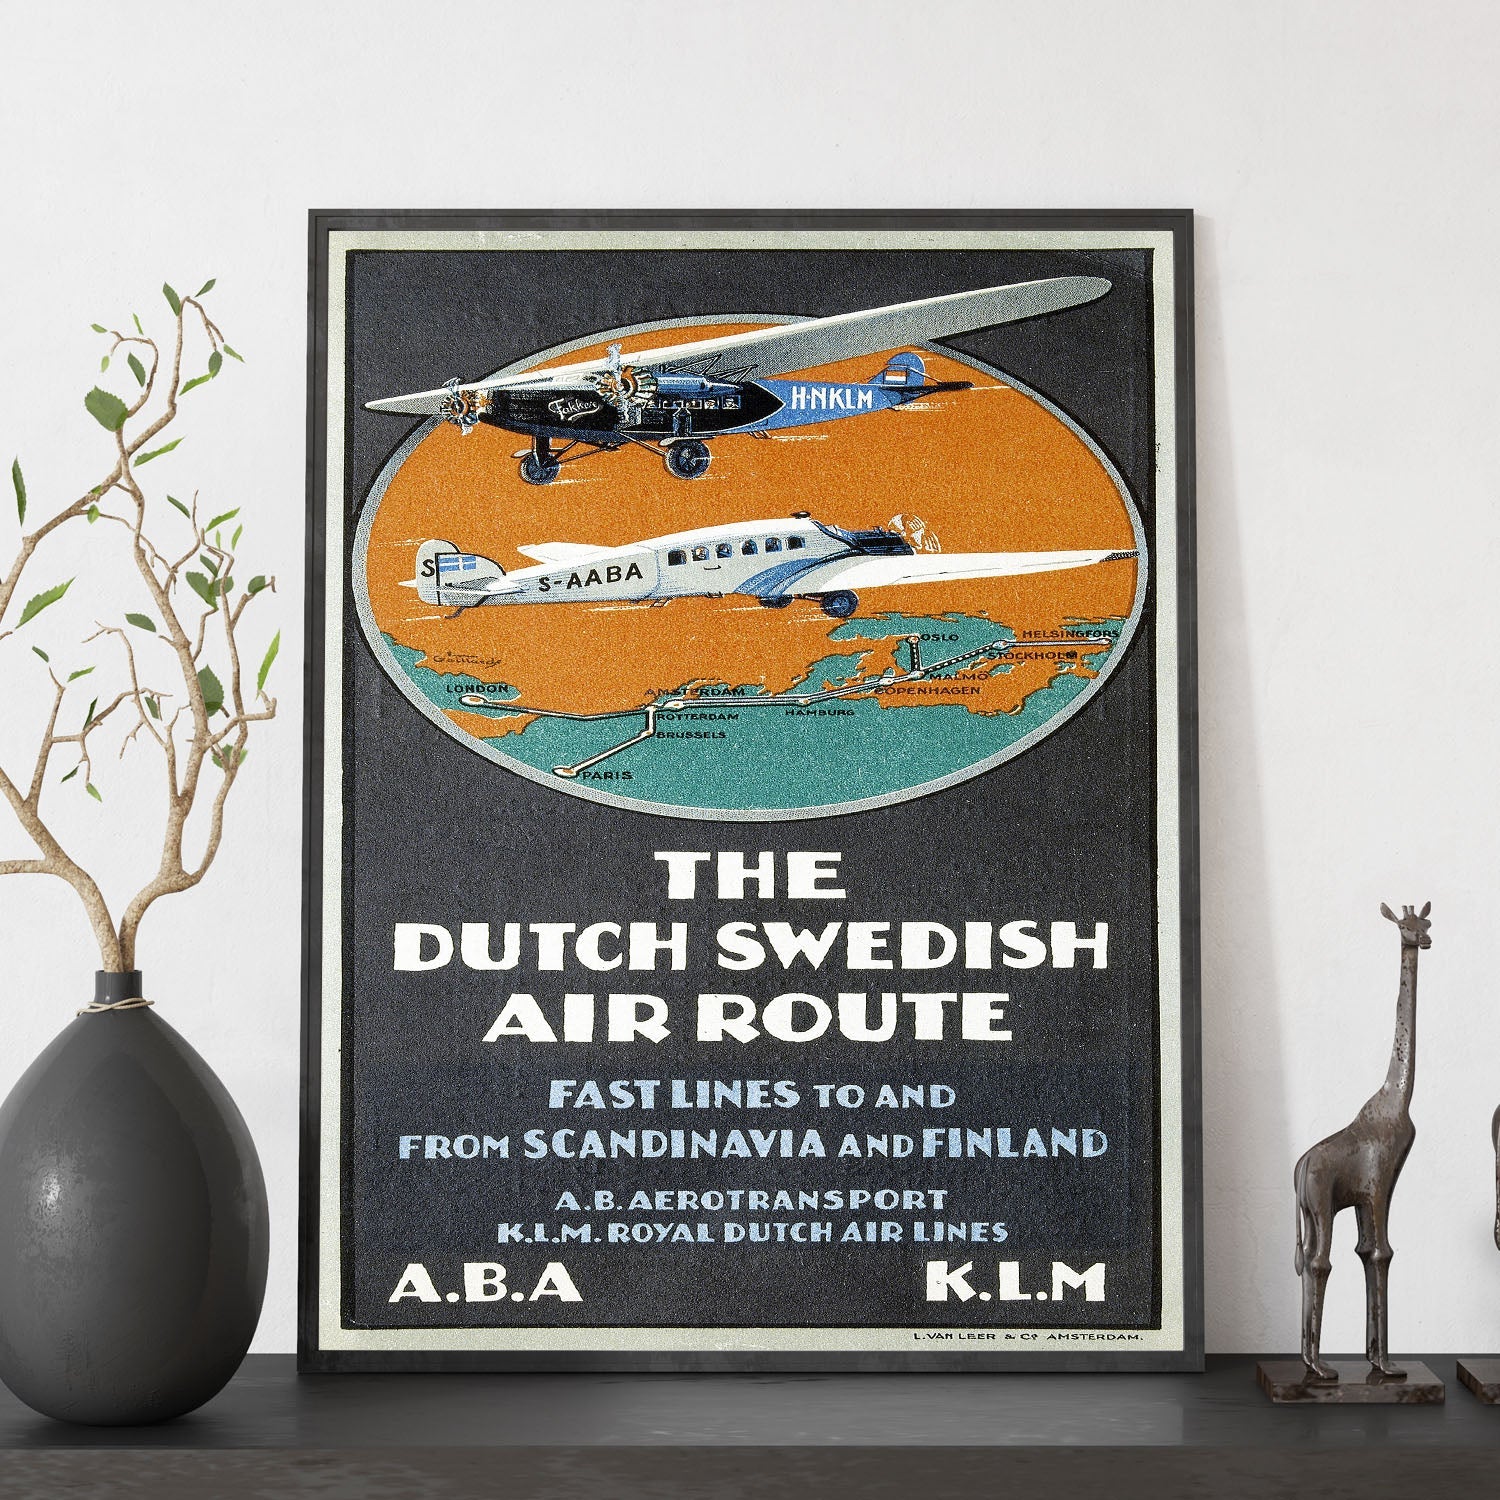 ABA_Advertisment_leaflet_about_The_Dutch_Swedish_Air_Route_by_ABA_and_KLM-Artwork-Nacnic-Nacnic Estudio SL